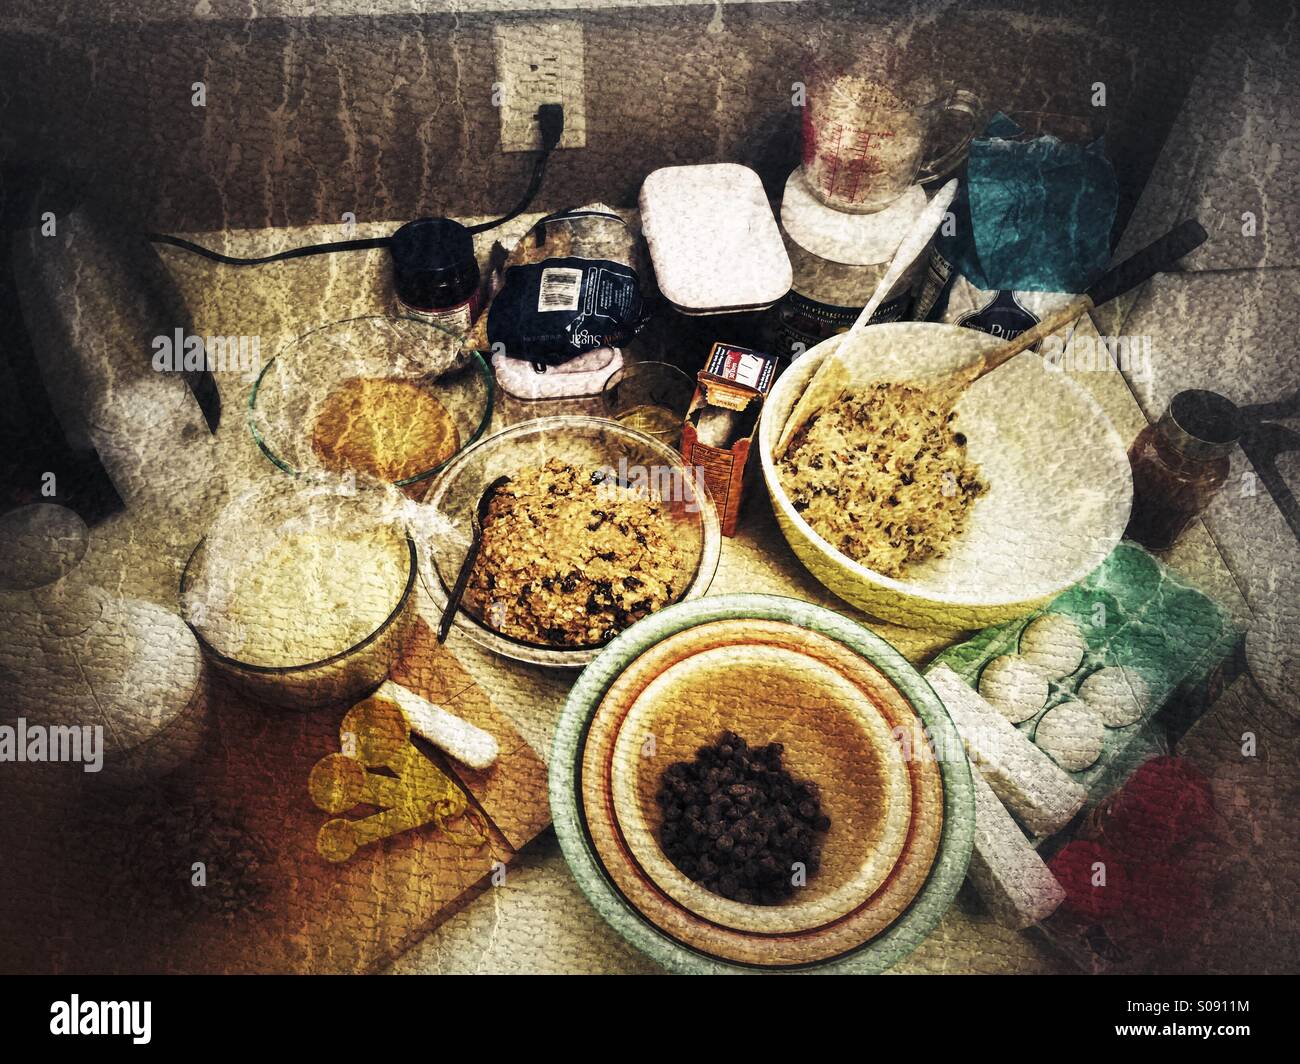 Darkened grungy textured photo of ingredients for homemade cookies on the kitchen counter Stock Photo